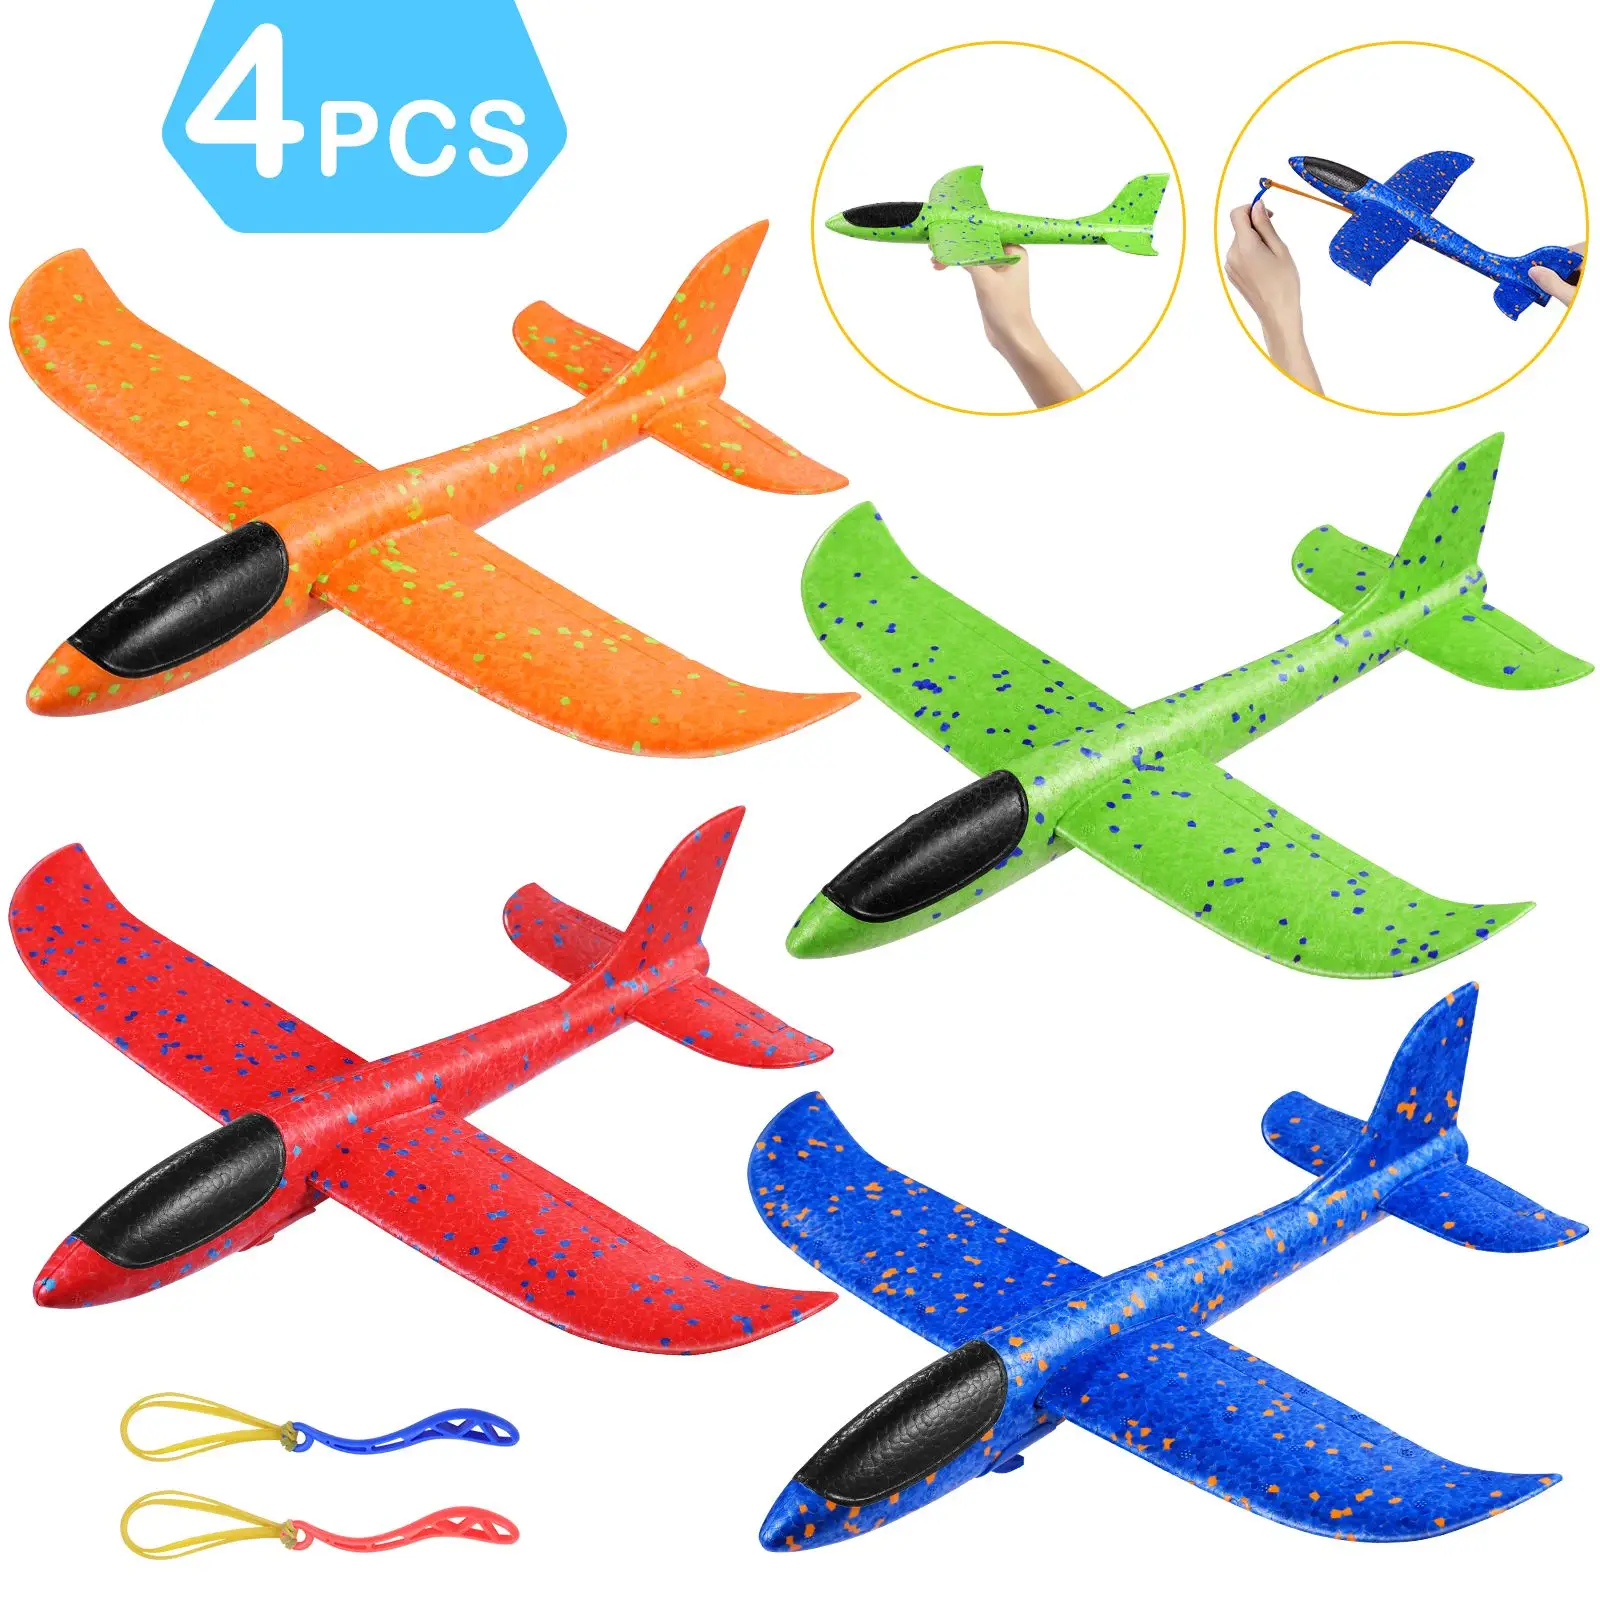 

iBaseToy 4pcs Assembly Flying Glider Plane Lightweight Airplanes Educational Kids Toys Party Playing Favors